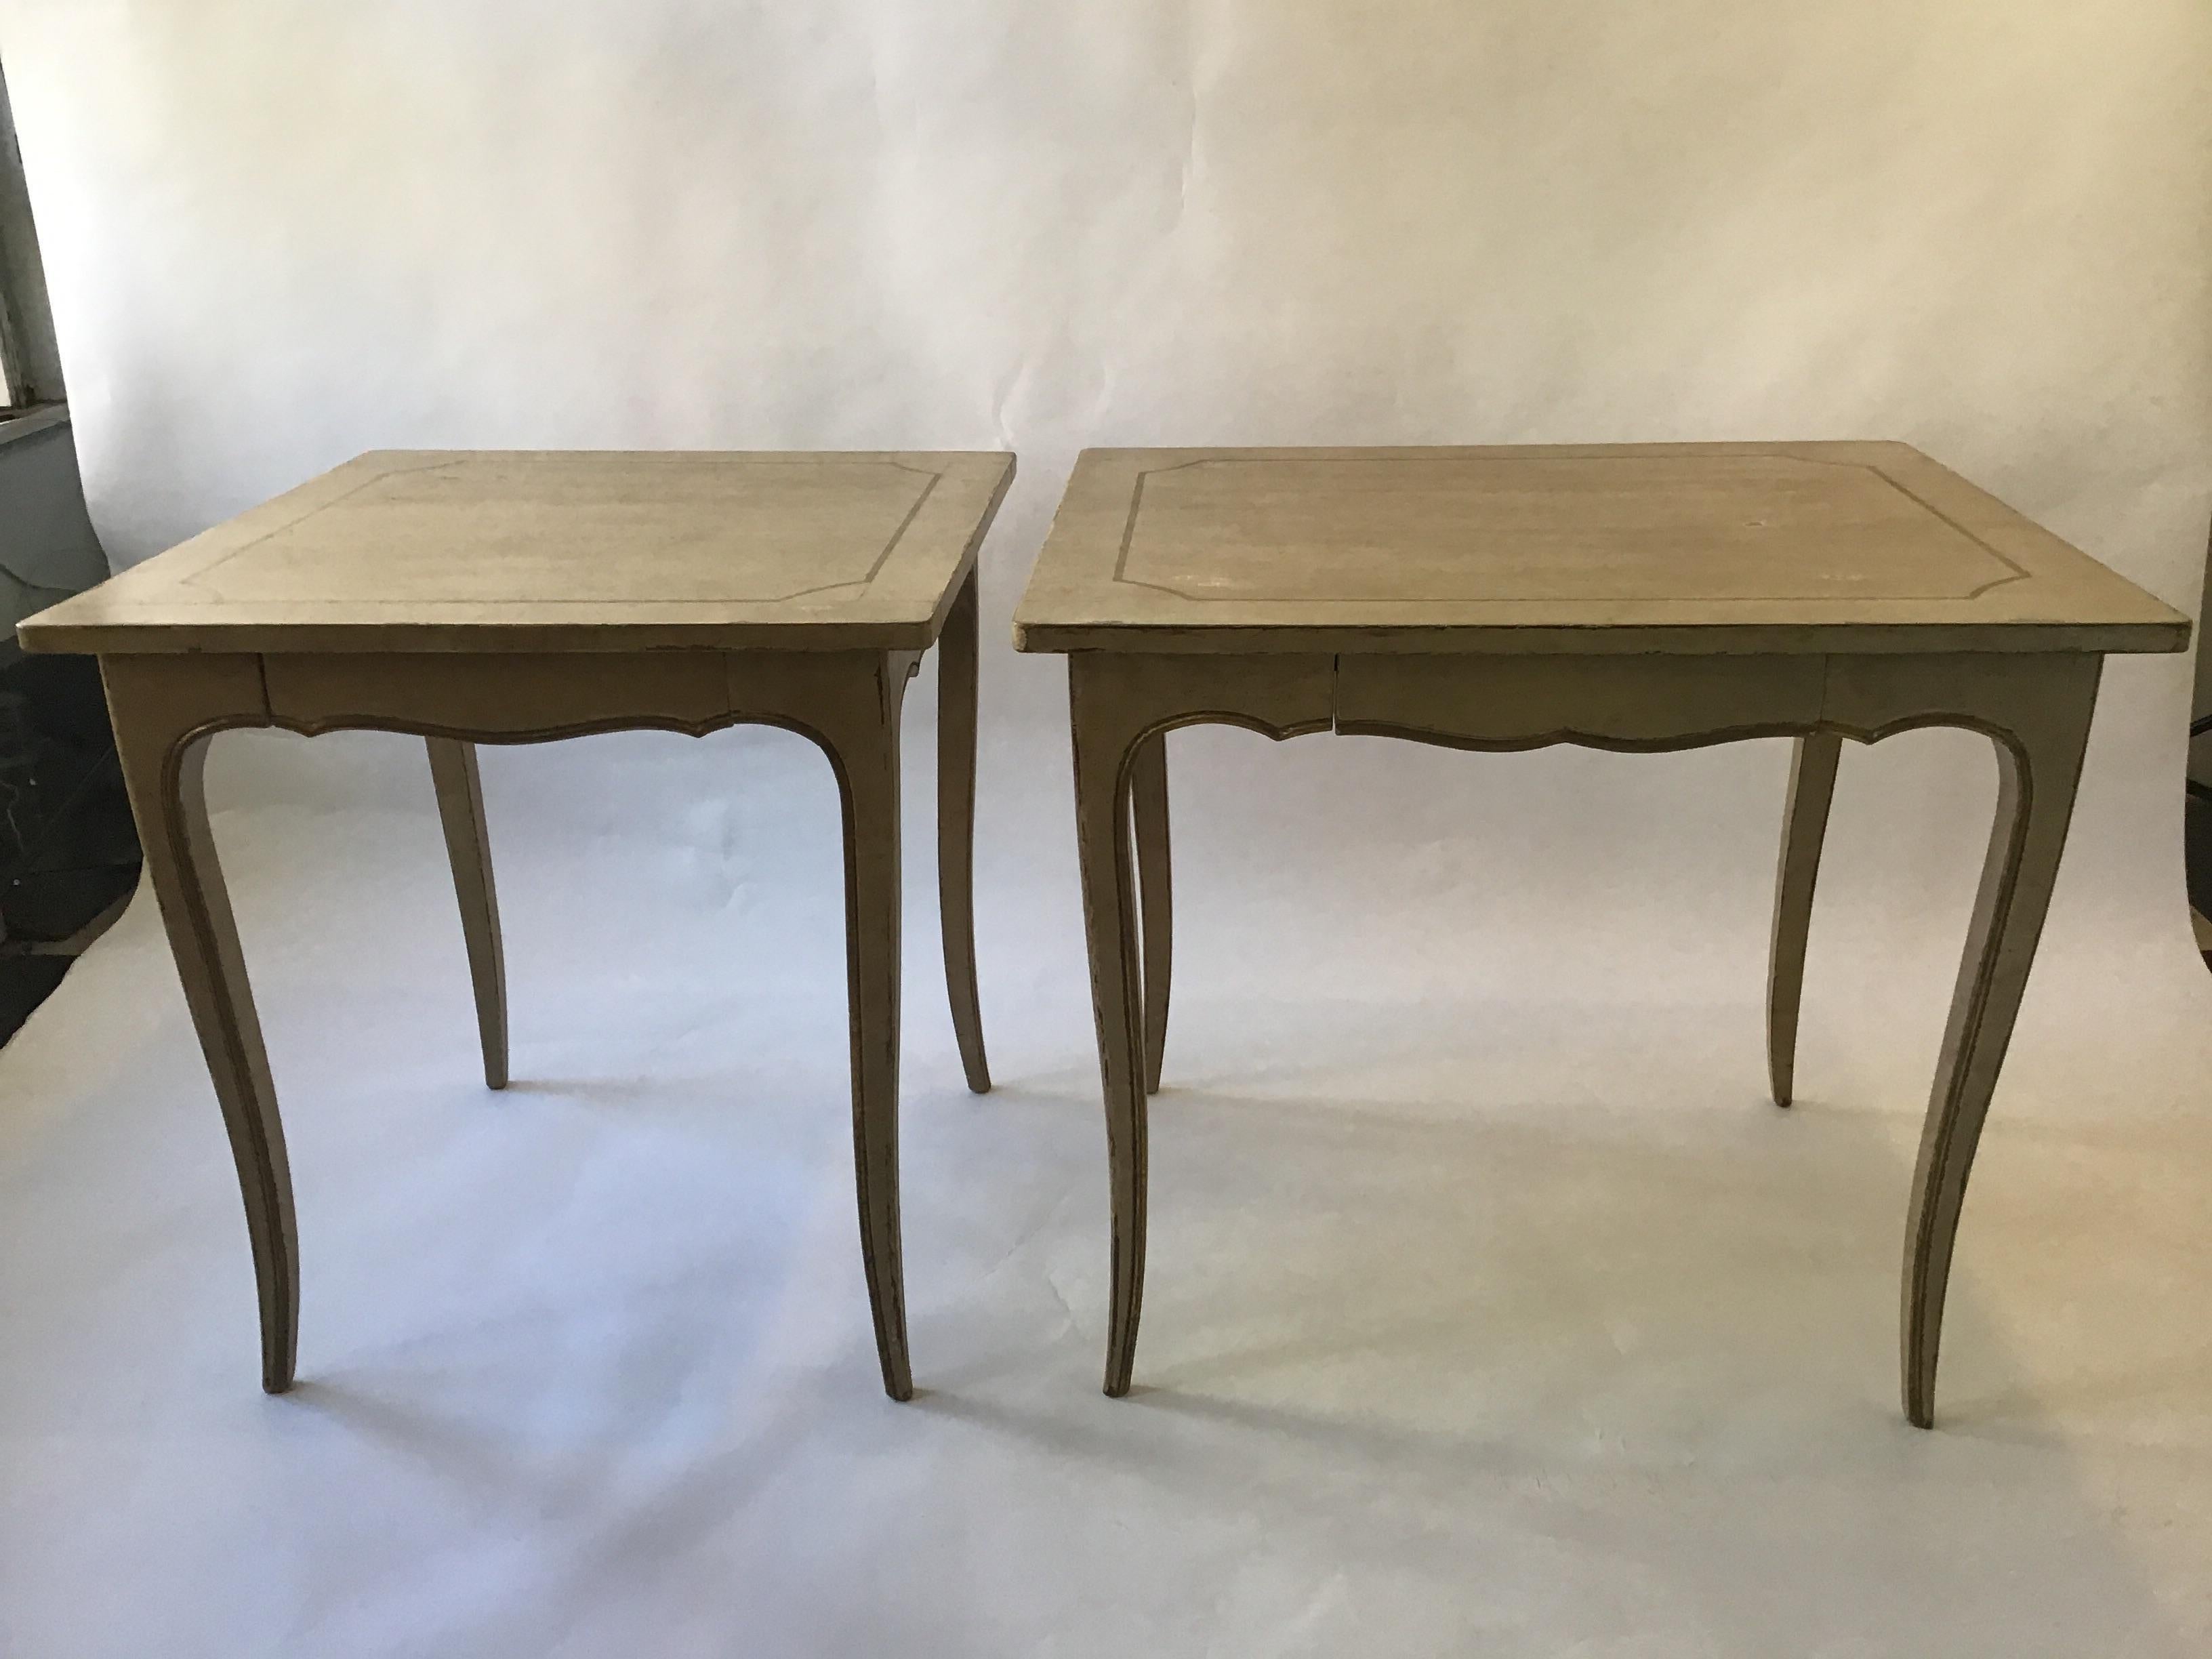 2 French style painted end tables. One table is larger than the other.